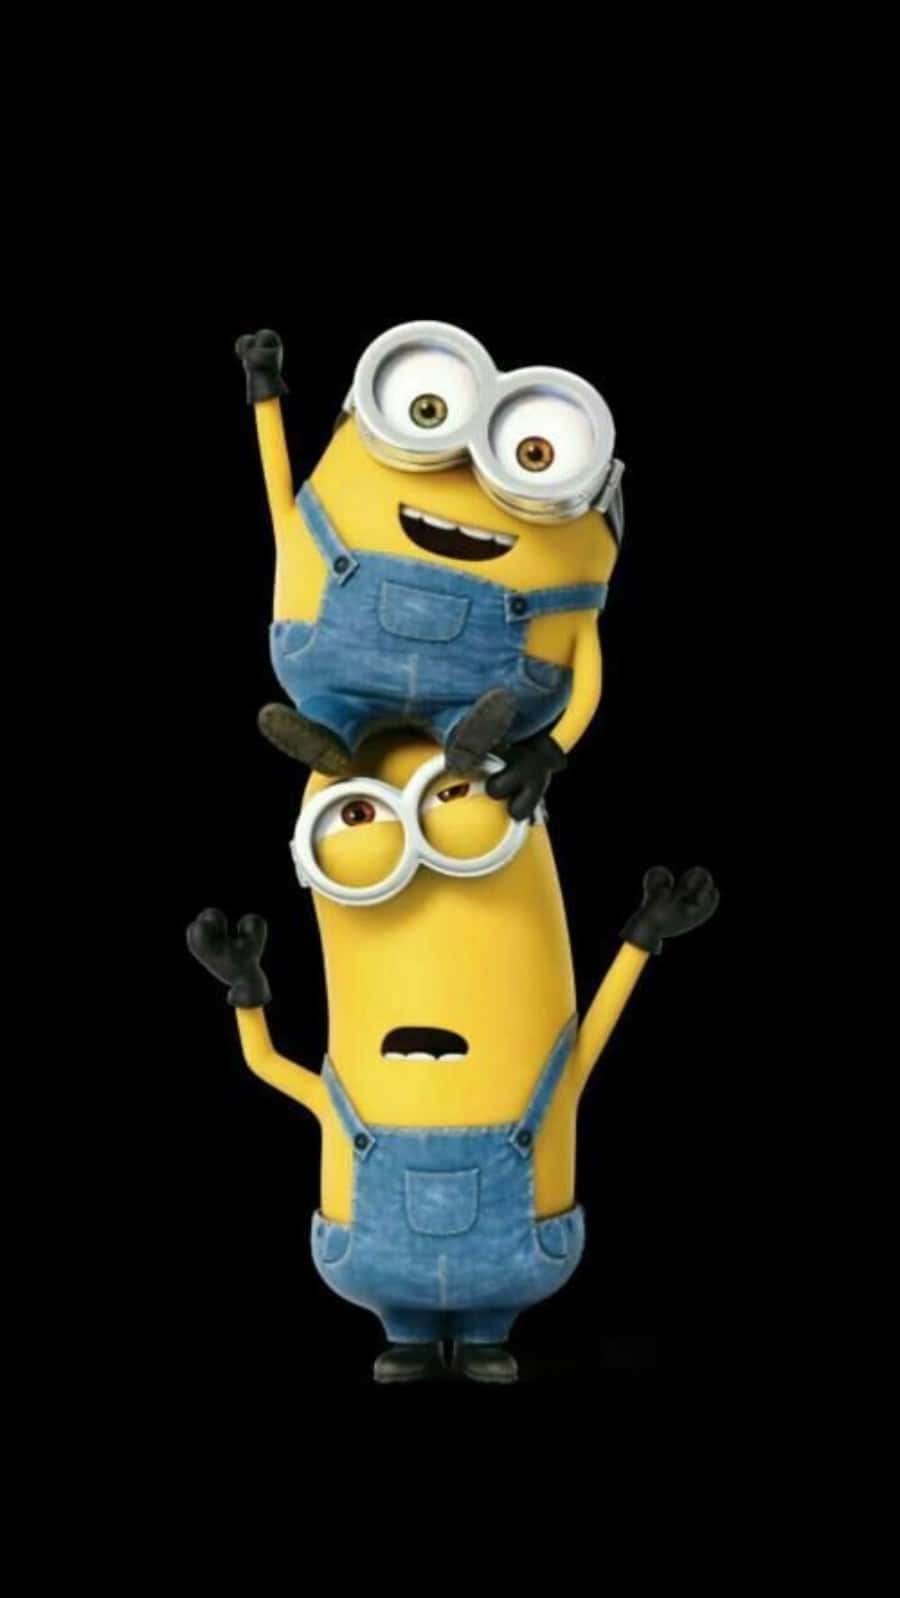 Bob On Kevin Despicable Me Minion Iphone Wallpaper